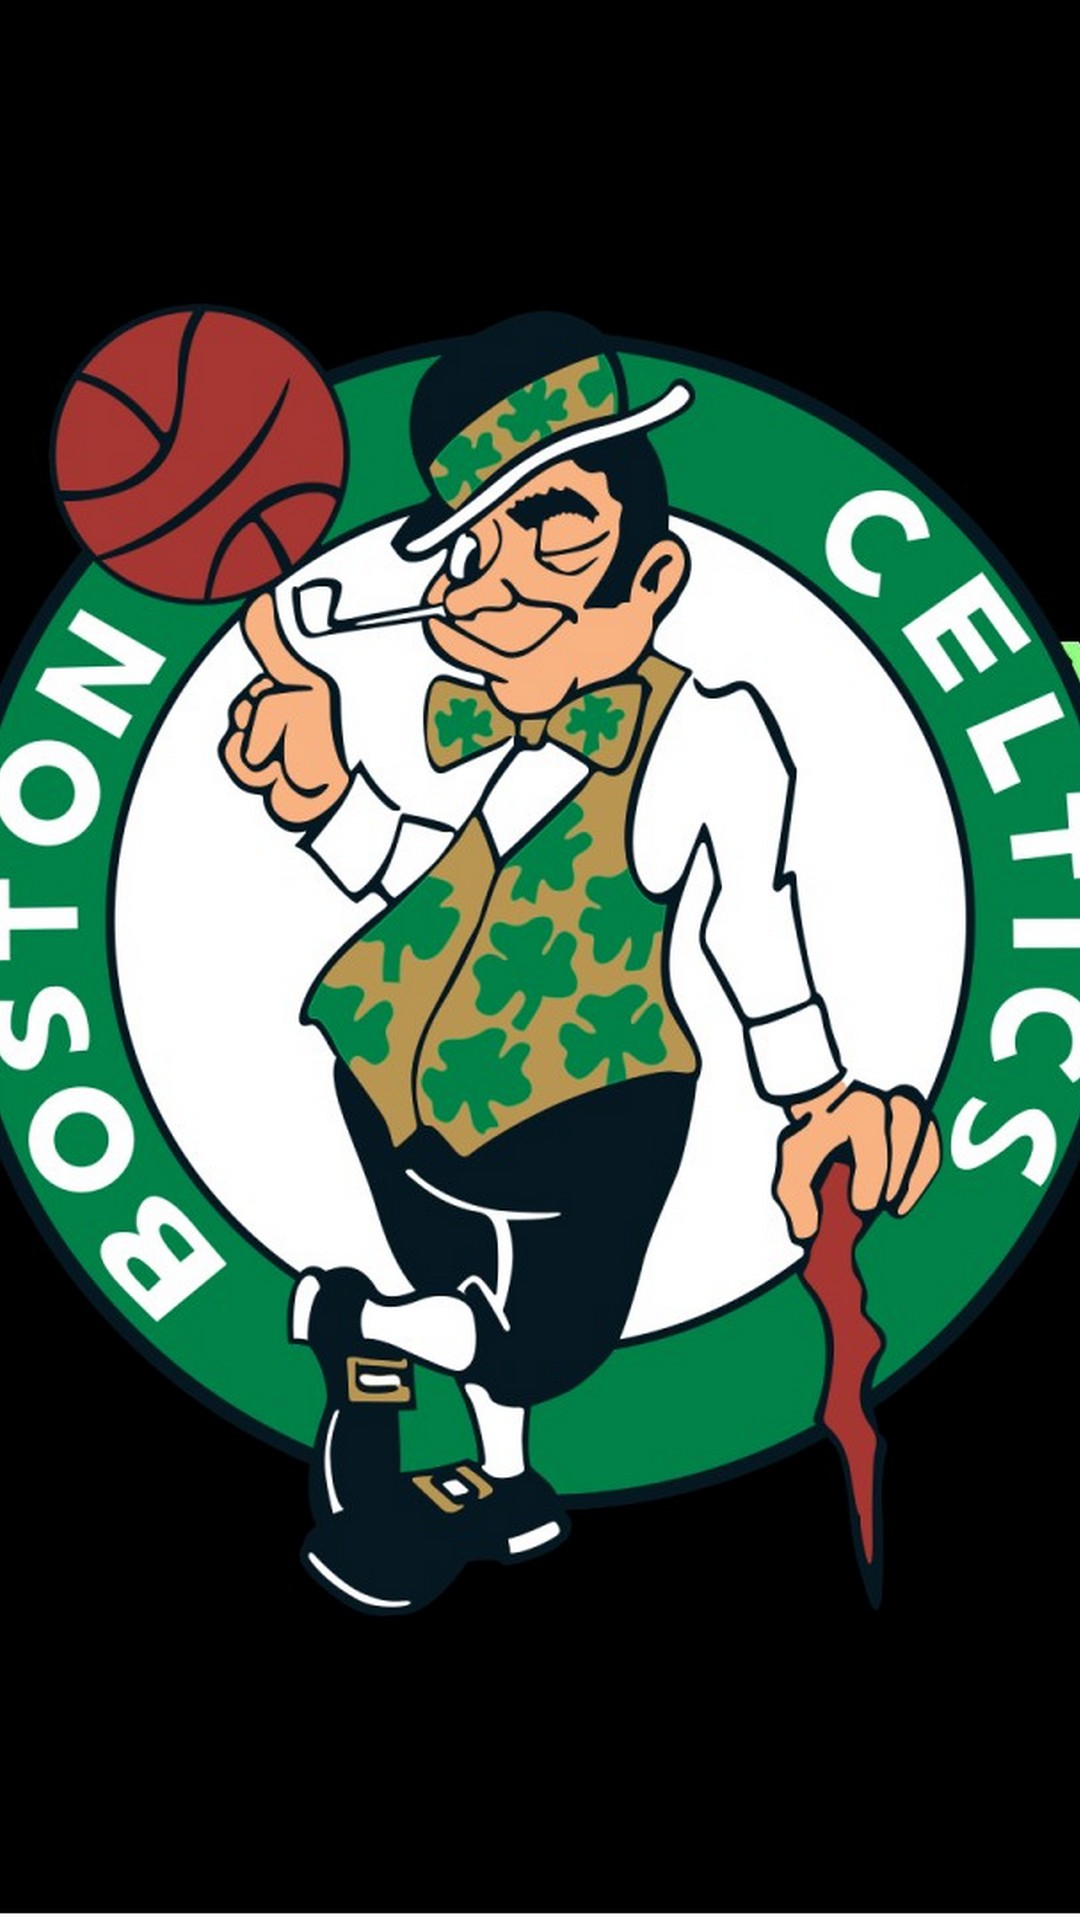 Wallpapers Phone Boston Celtics with resolution 1080X1920 pixel. You can make this wallpaper for your Android backgrounds, Tablet, Smartphones Screensavers and Mobile Phone Lock Screen